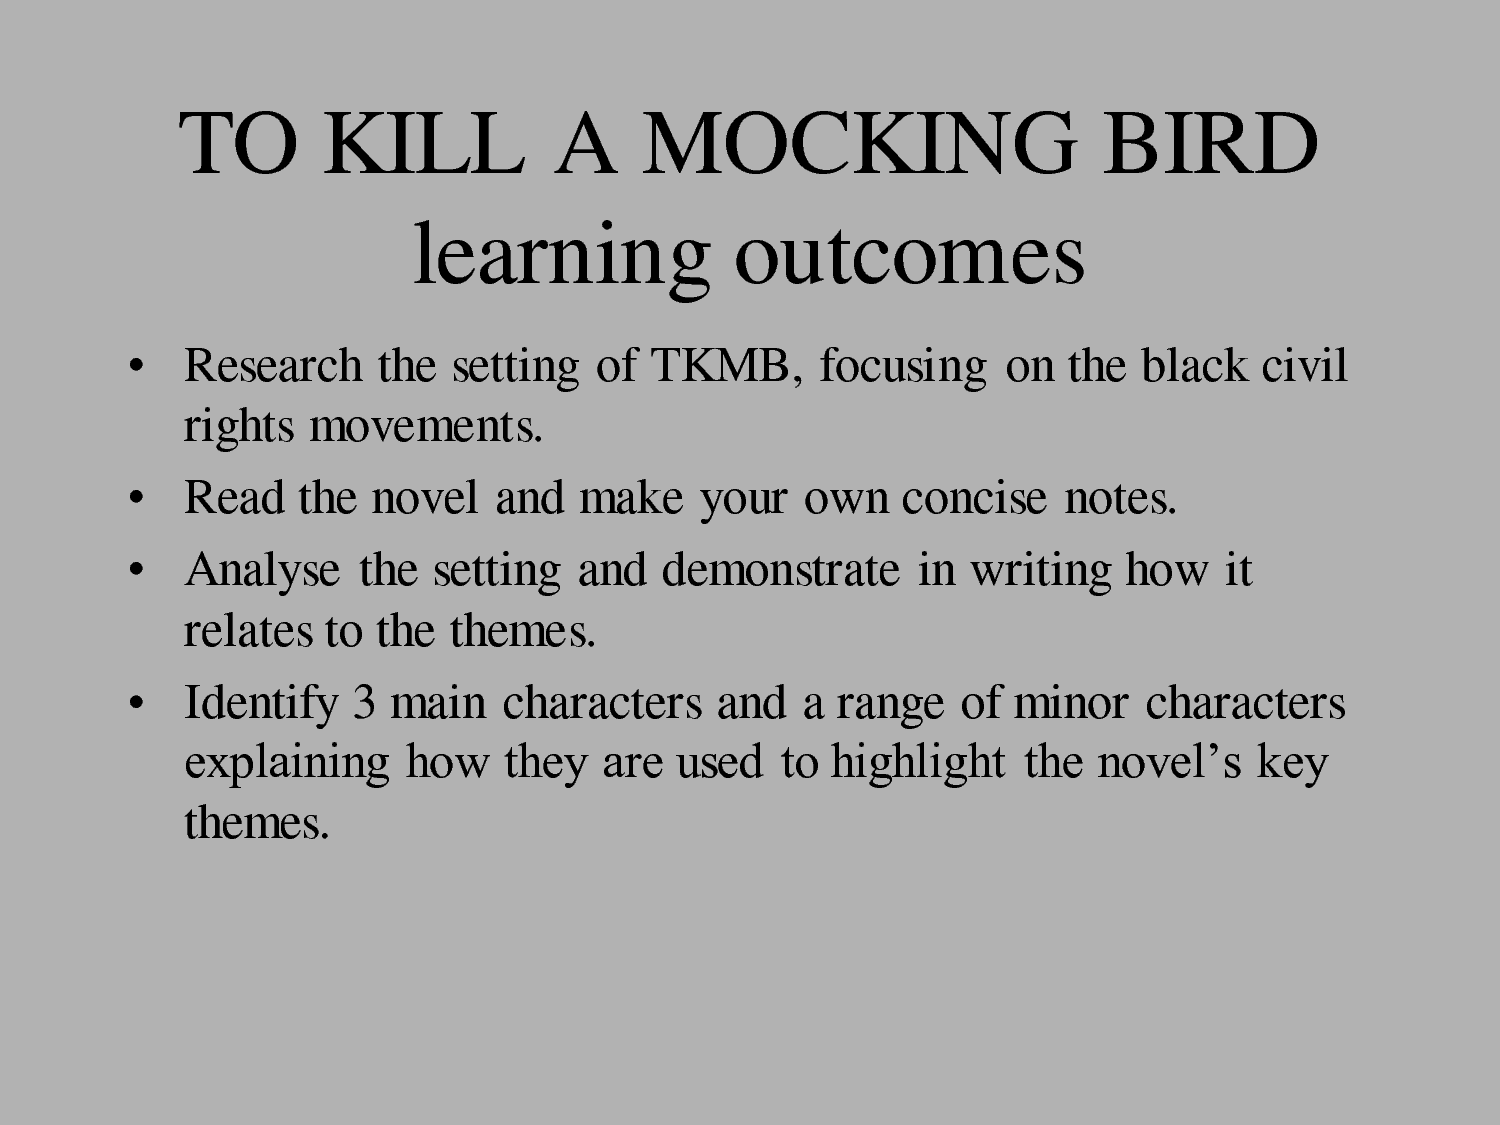 What are 3 quotes from the book that show racial discrimination in To Kill a Mockingbird?